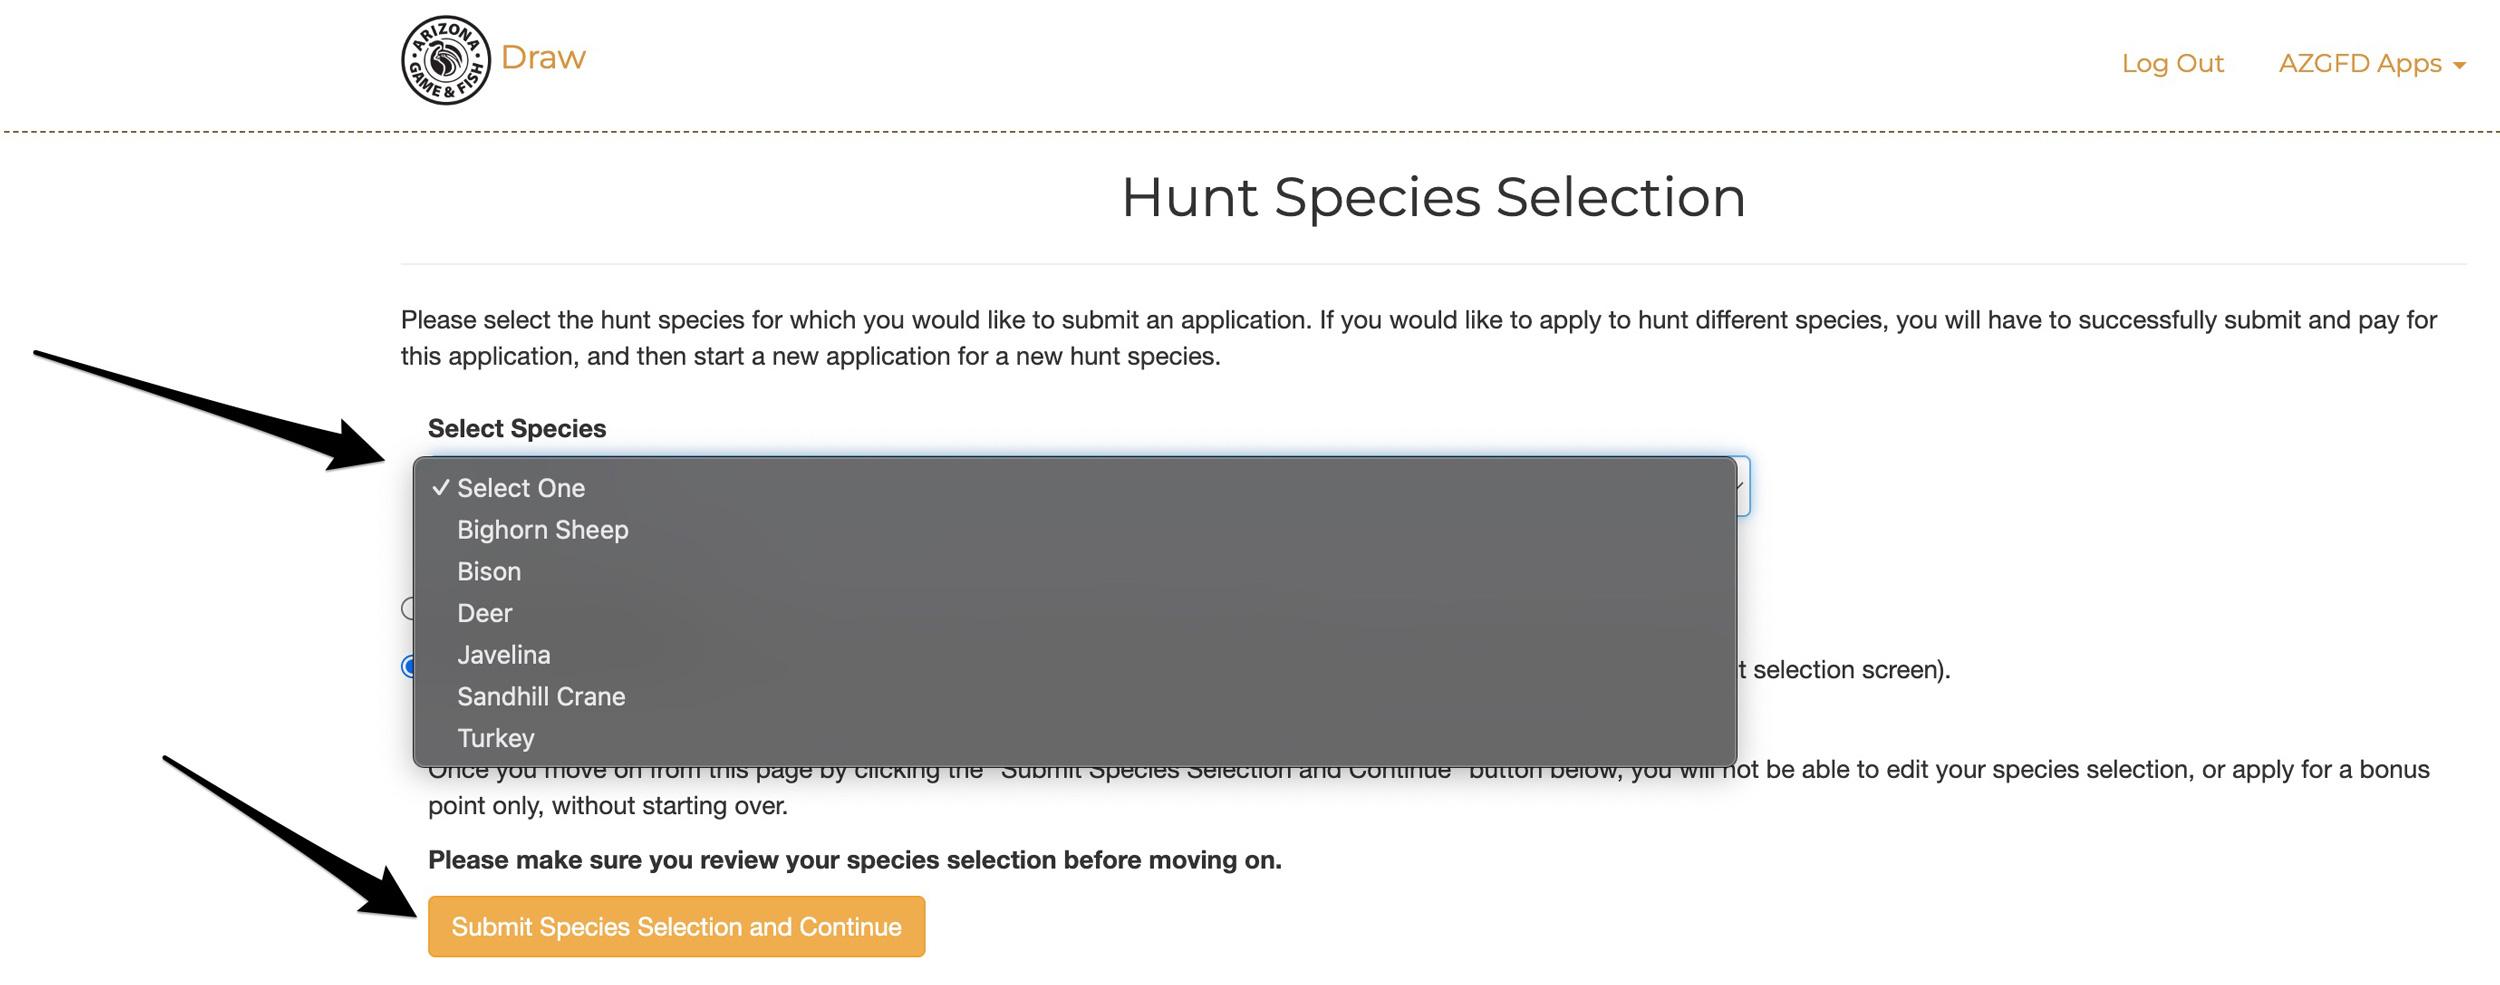 Selecting the species you want to purchase bonus points for in Arizona